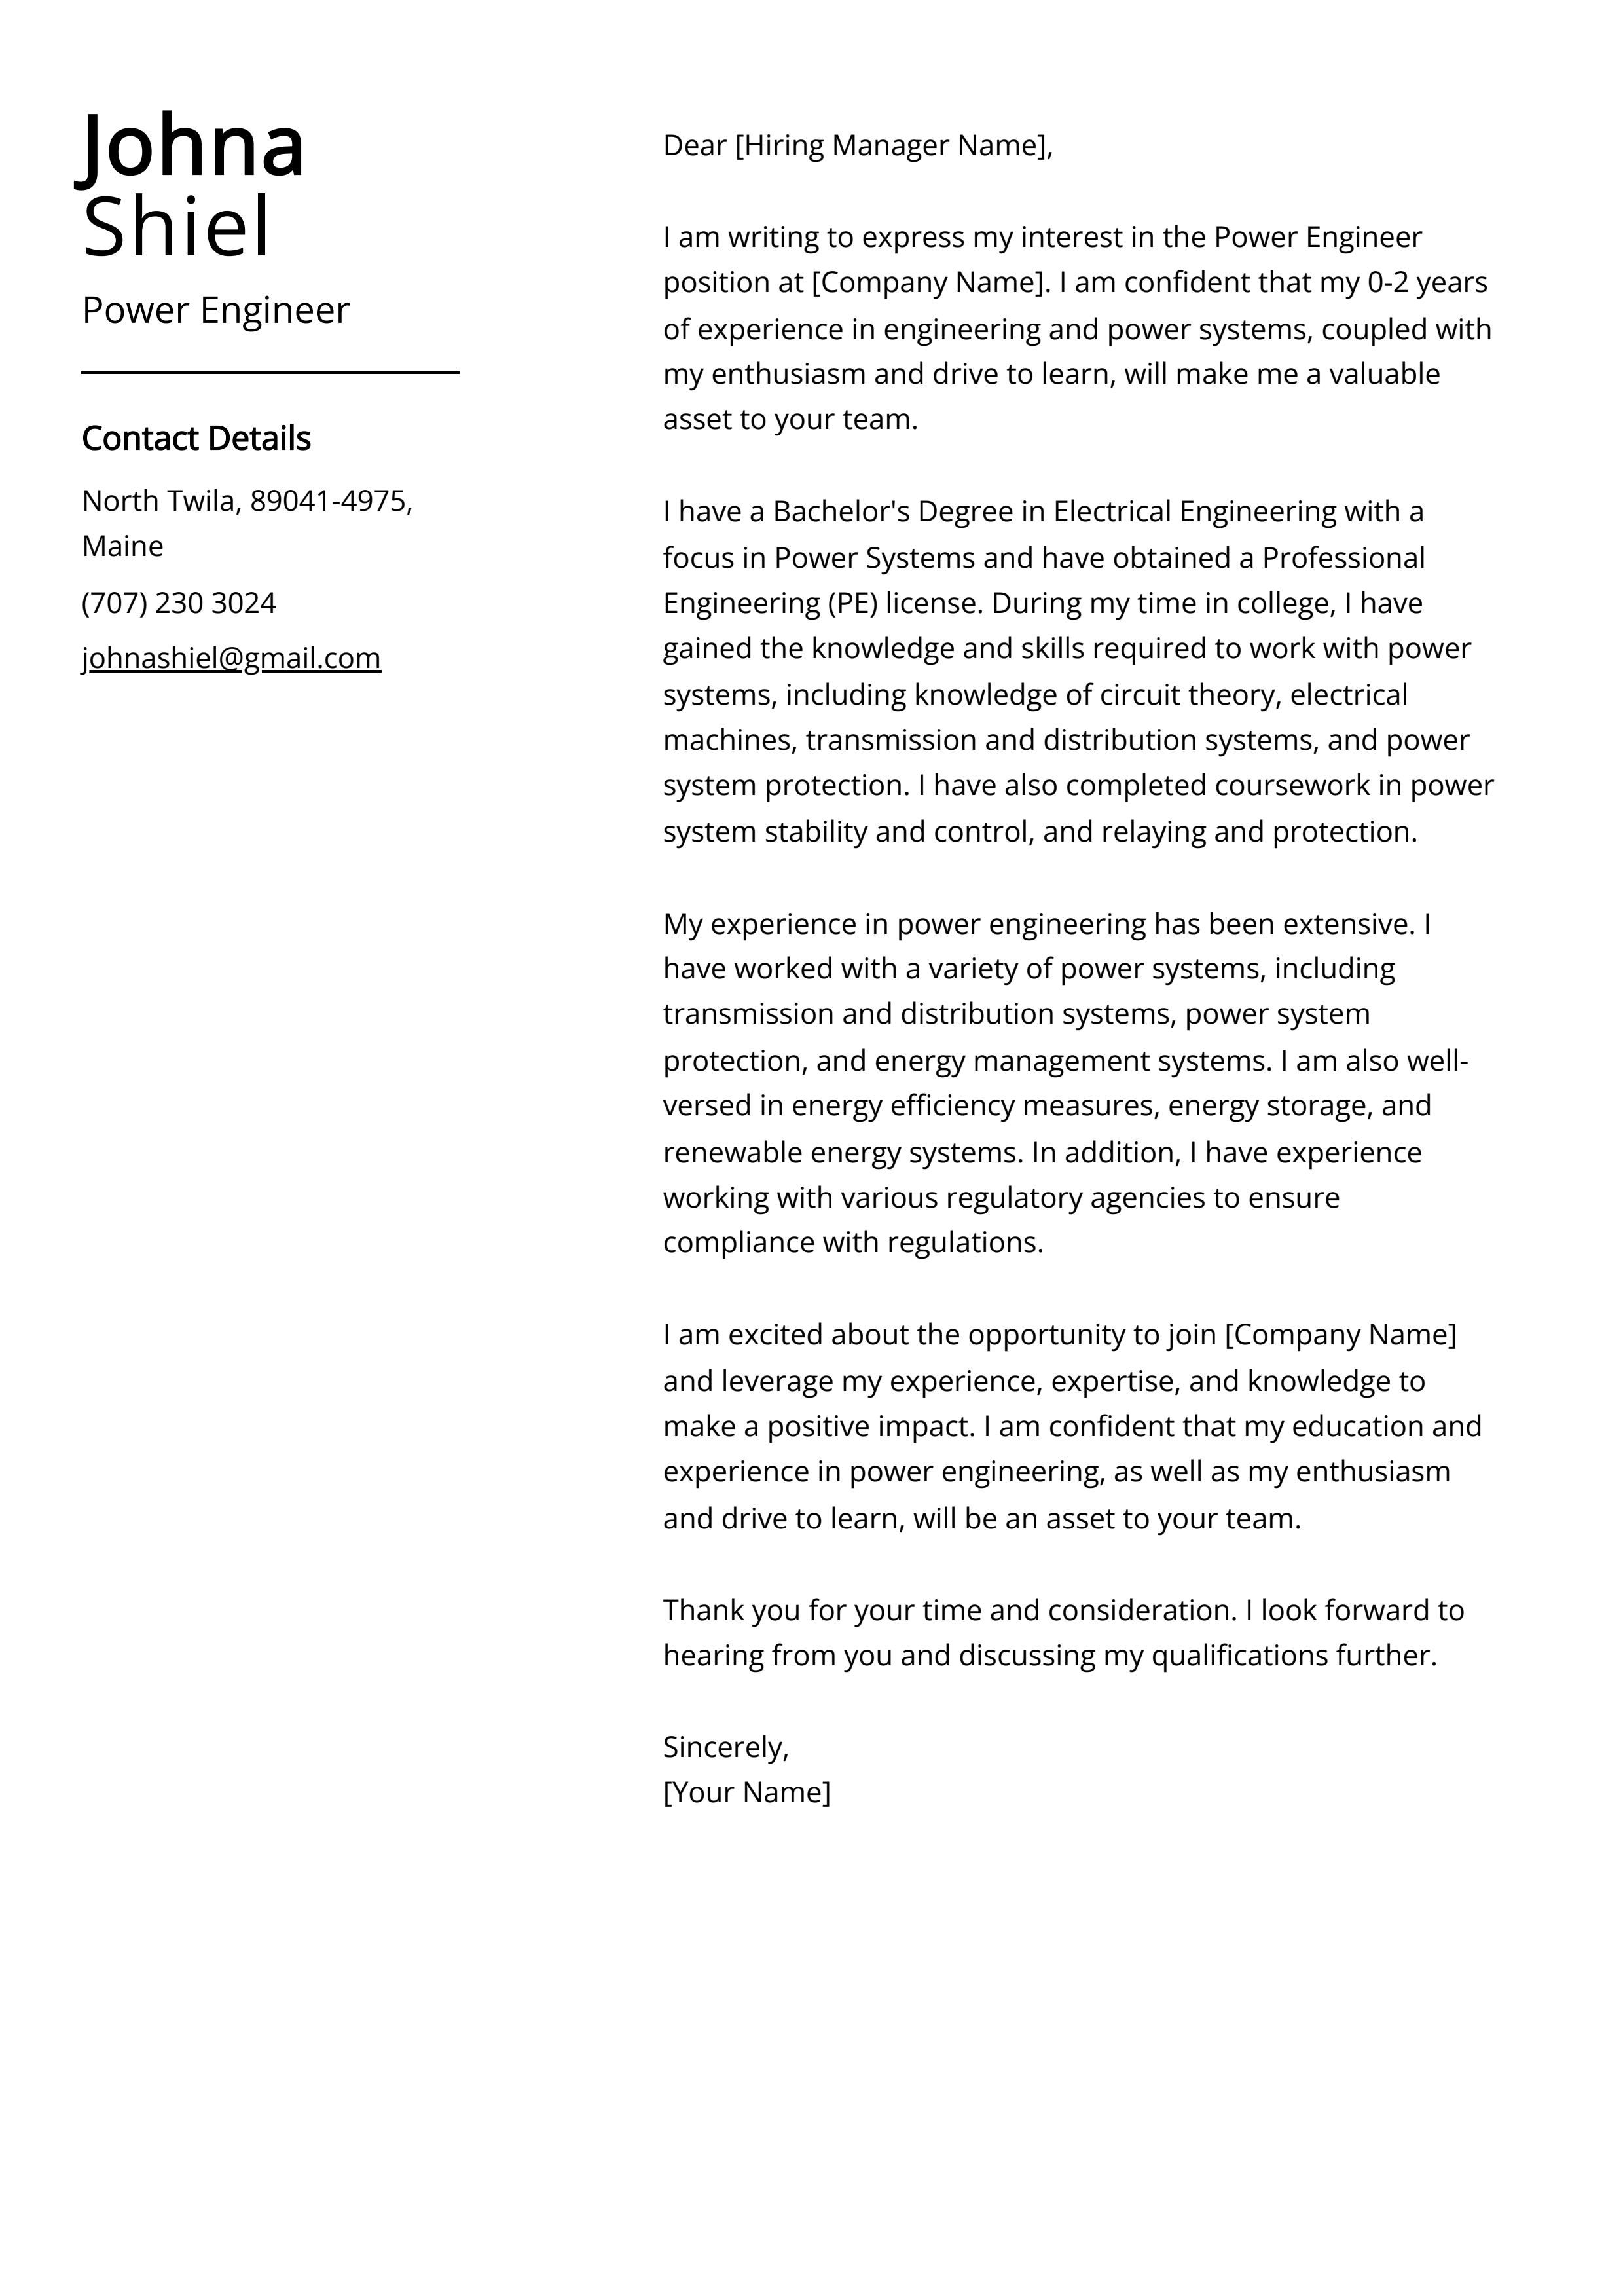 Power Engineer Cover Letter Example